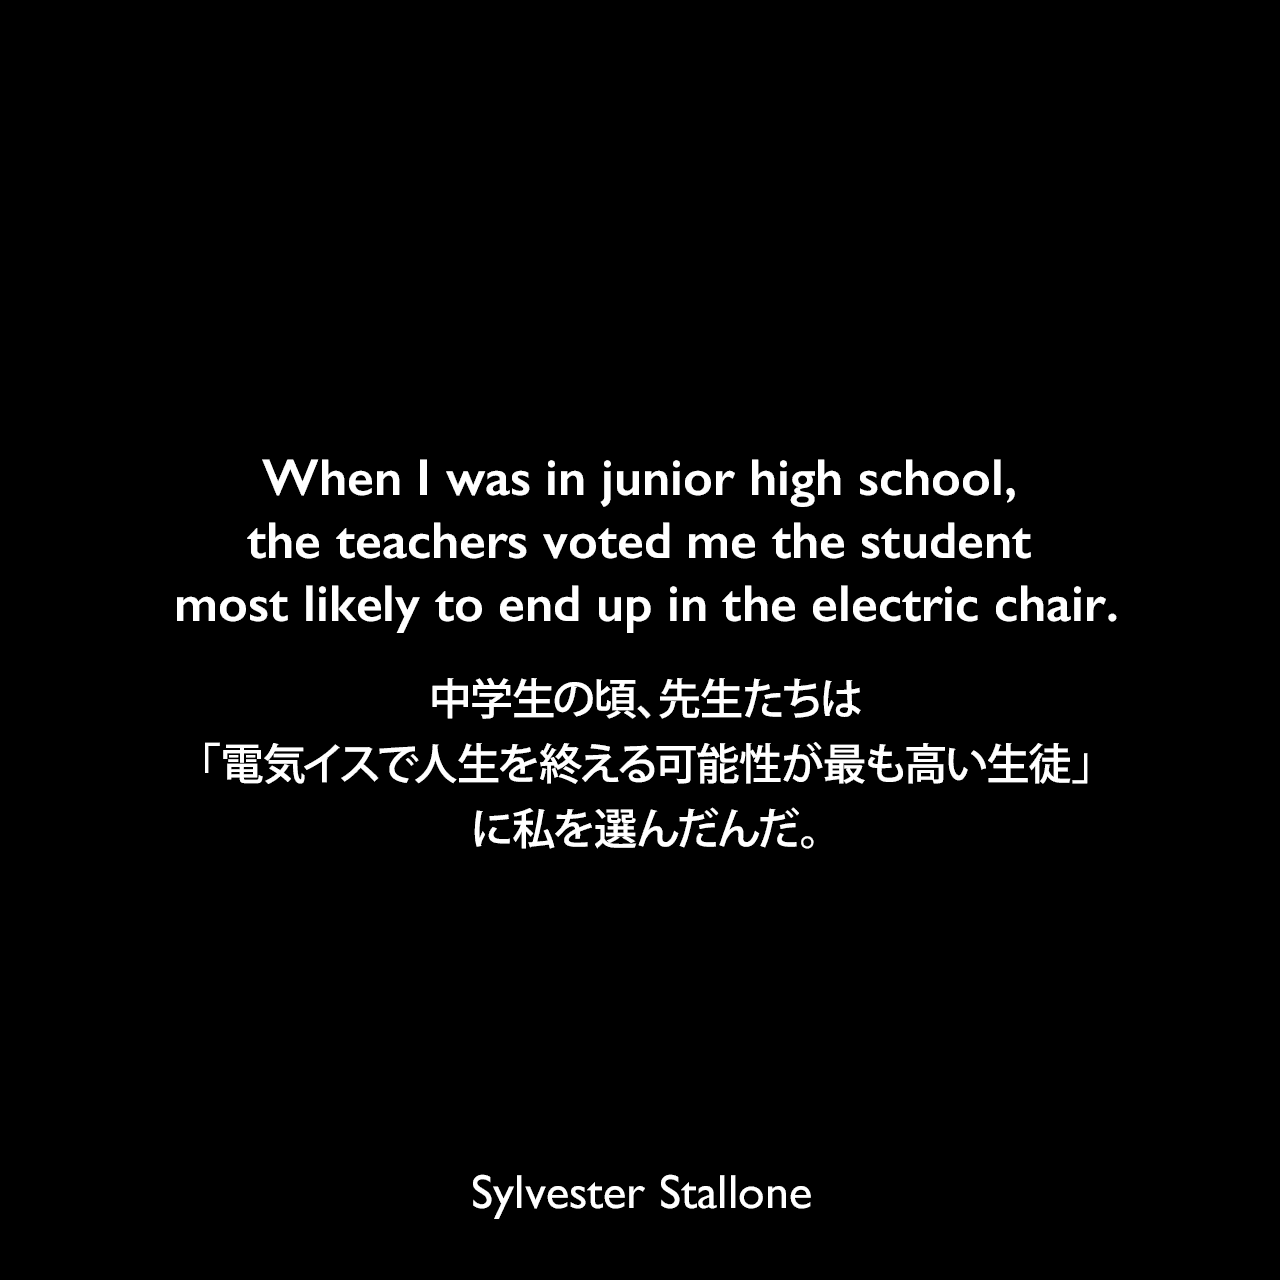 When I was in junior high school, the teachers voted me the student most likely to end up in the electric chair.中学生の頃、先生たちは「電気イスで人生を終える可能性が最も高い生徒」に私を選んだんだ。Sylvester Stallone